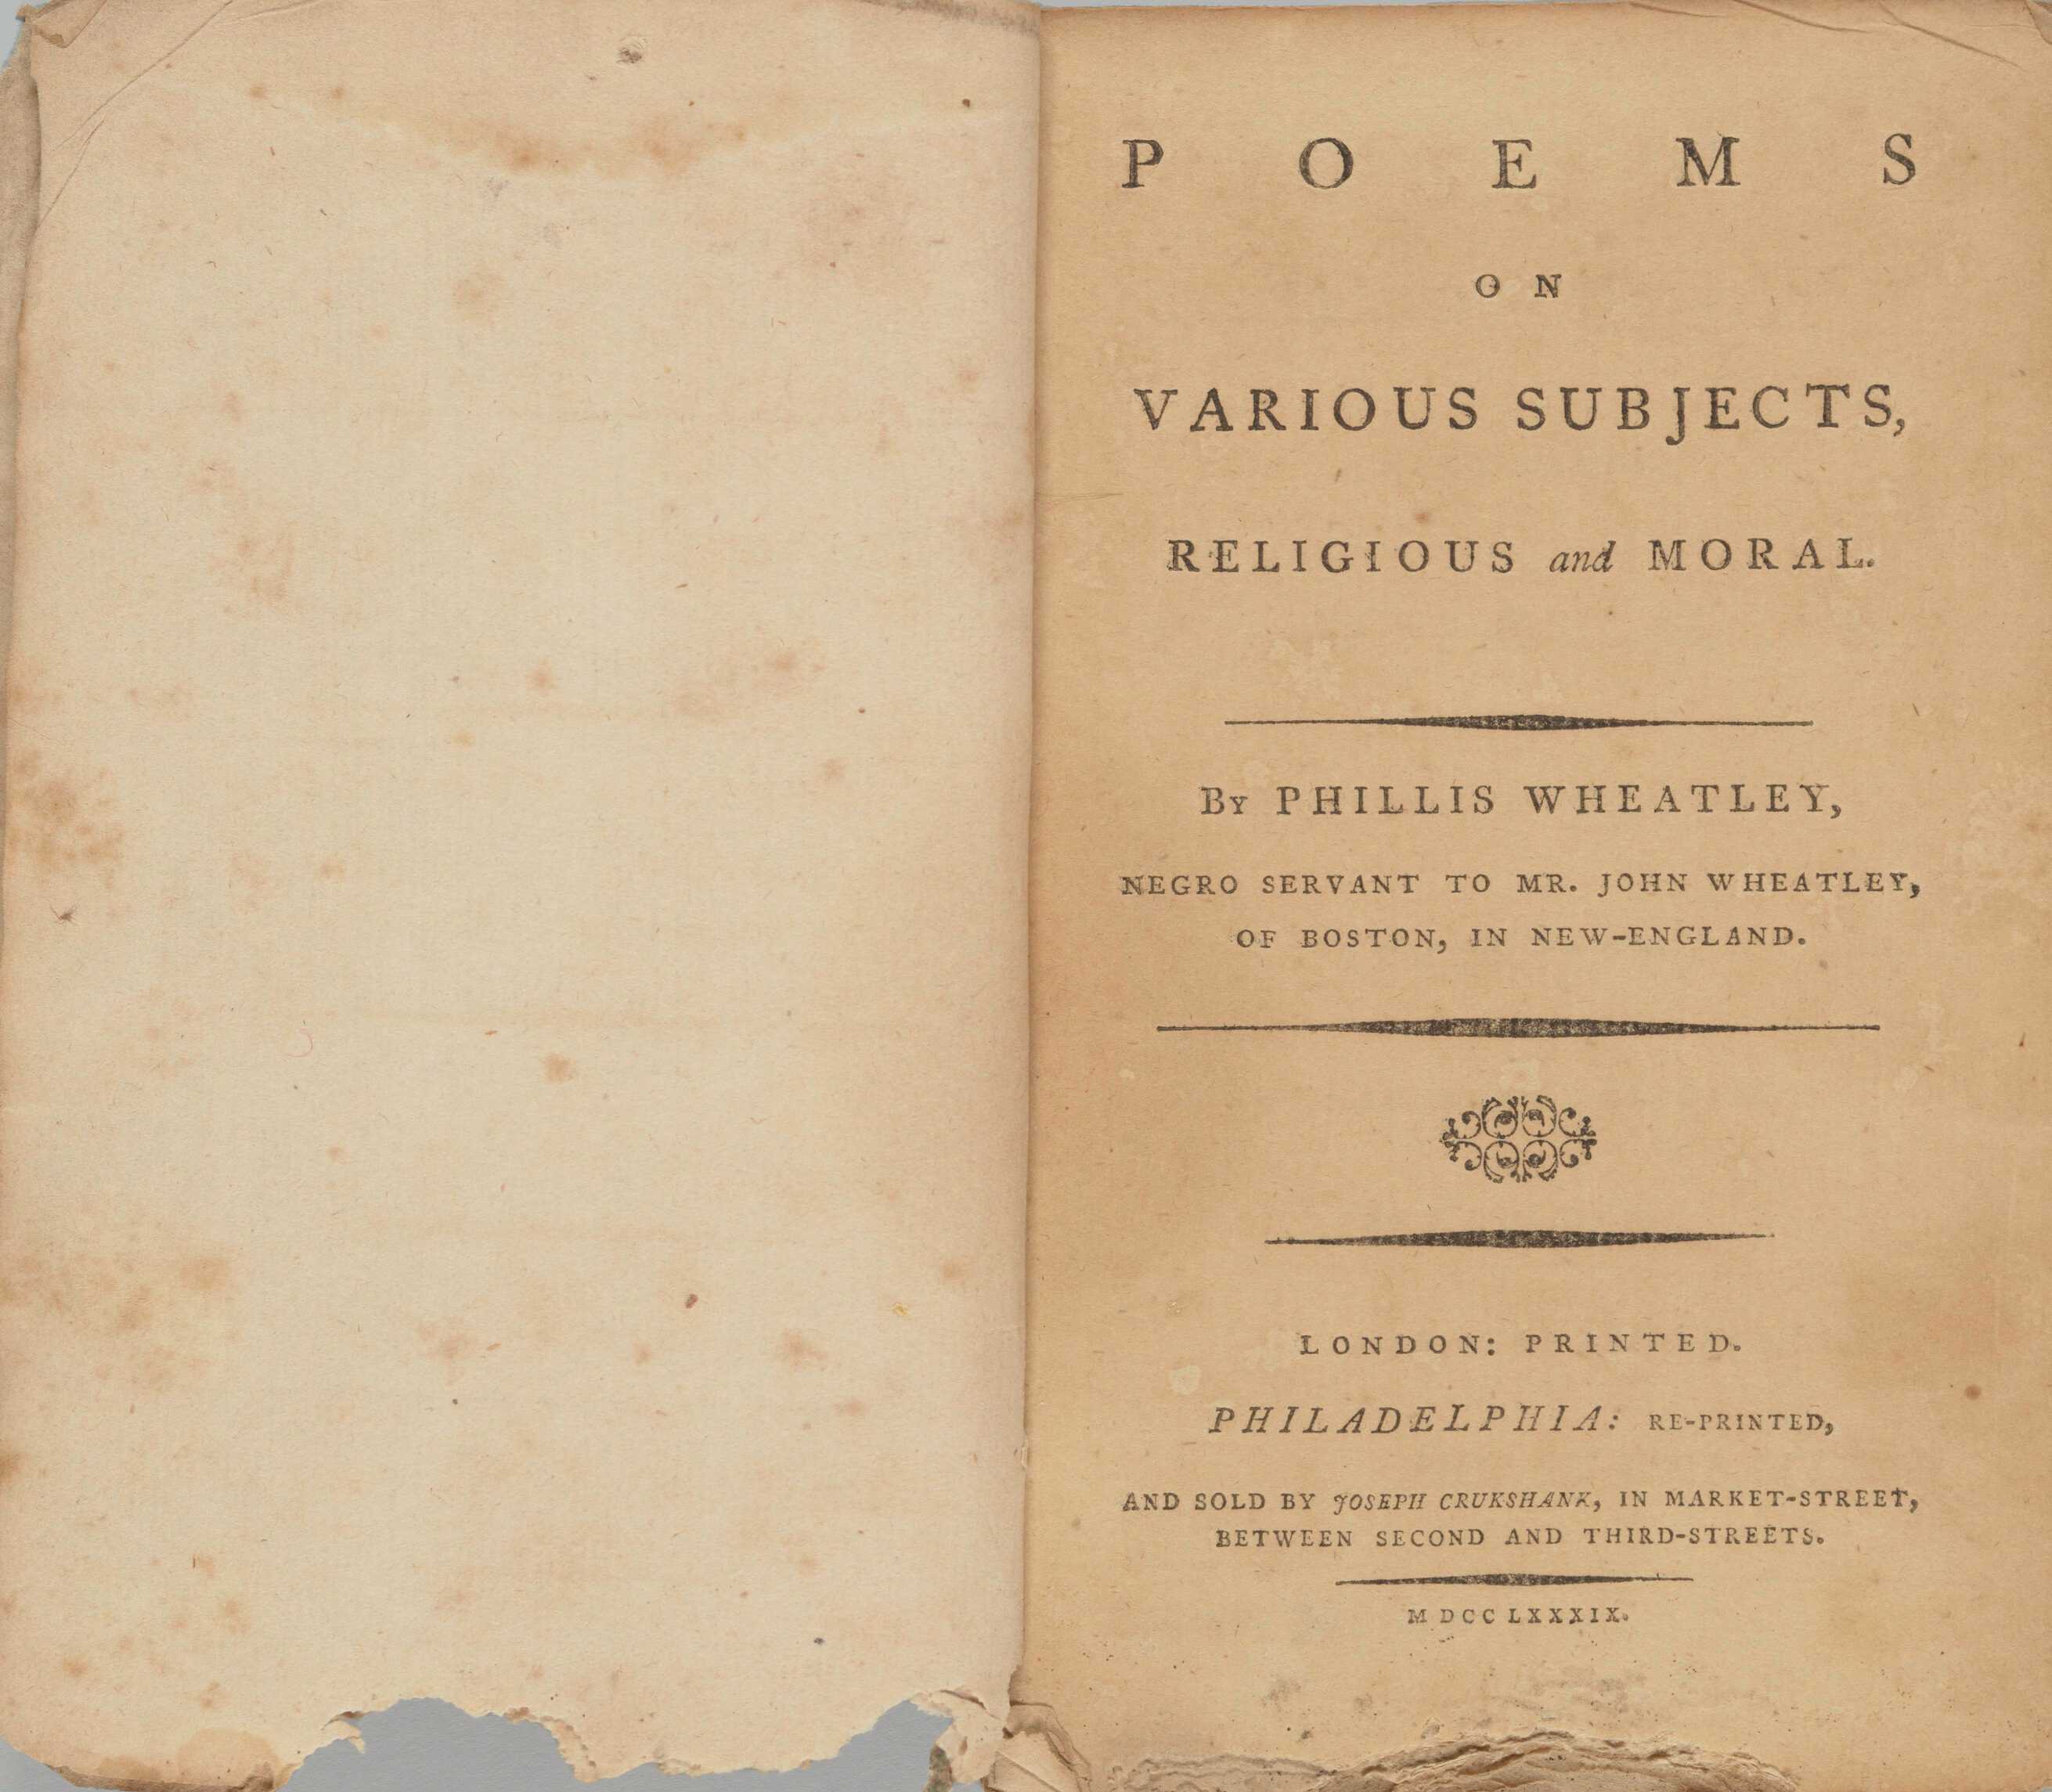 Inside cover of Phillis Wheatley's book entitled Poems of Various Subjects